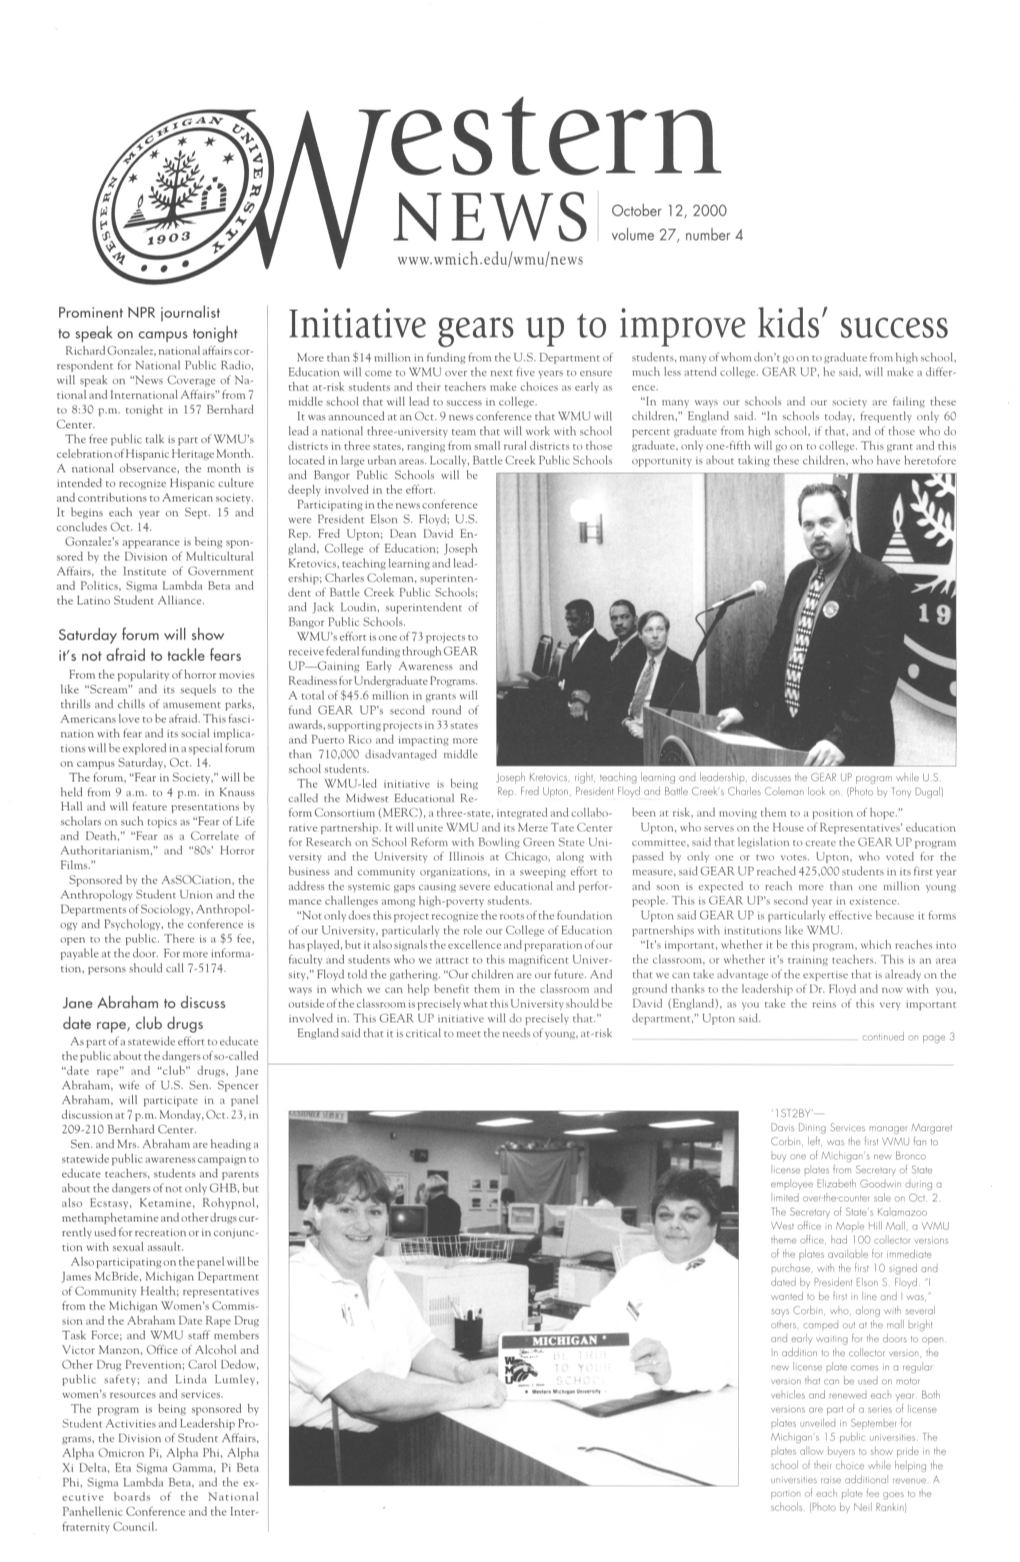 Initiative Gears up to Improve Kids' Success Richard Gonzalez, National Affairs Cor- More Than $14 Million in Funding from the U.S